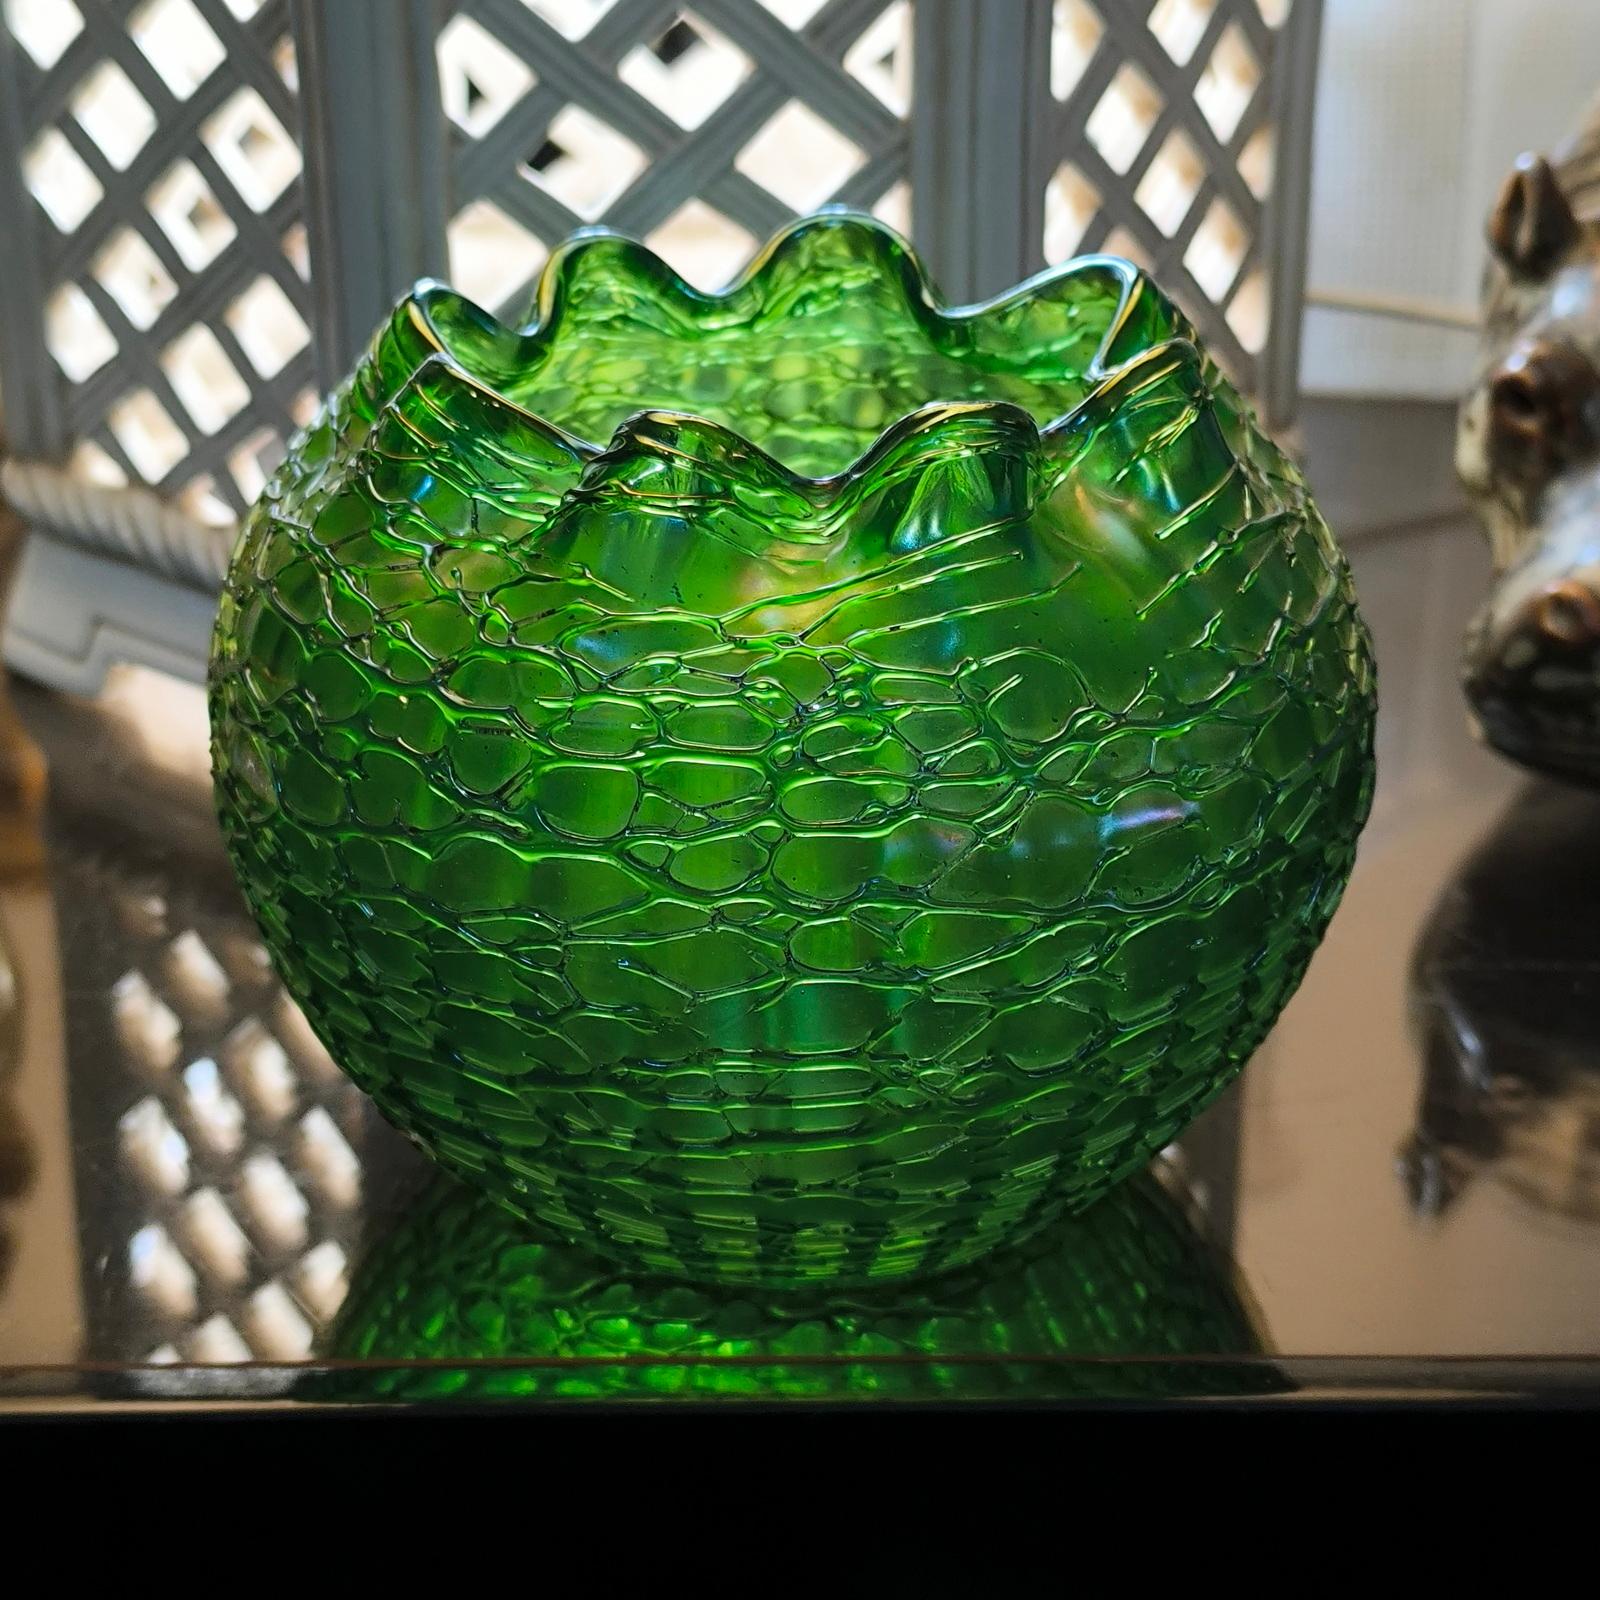 A vase, Johann Lötz Witwe, Klostermühle, c. 1900
Decoration: Crete chiné (1896/97); green underlaid glass; pre-blown into a multi-piece ribbed mold; mold-blown; wrapped in an irregular mesh of green glass threads; reduced and with iridescence; ball